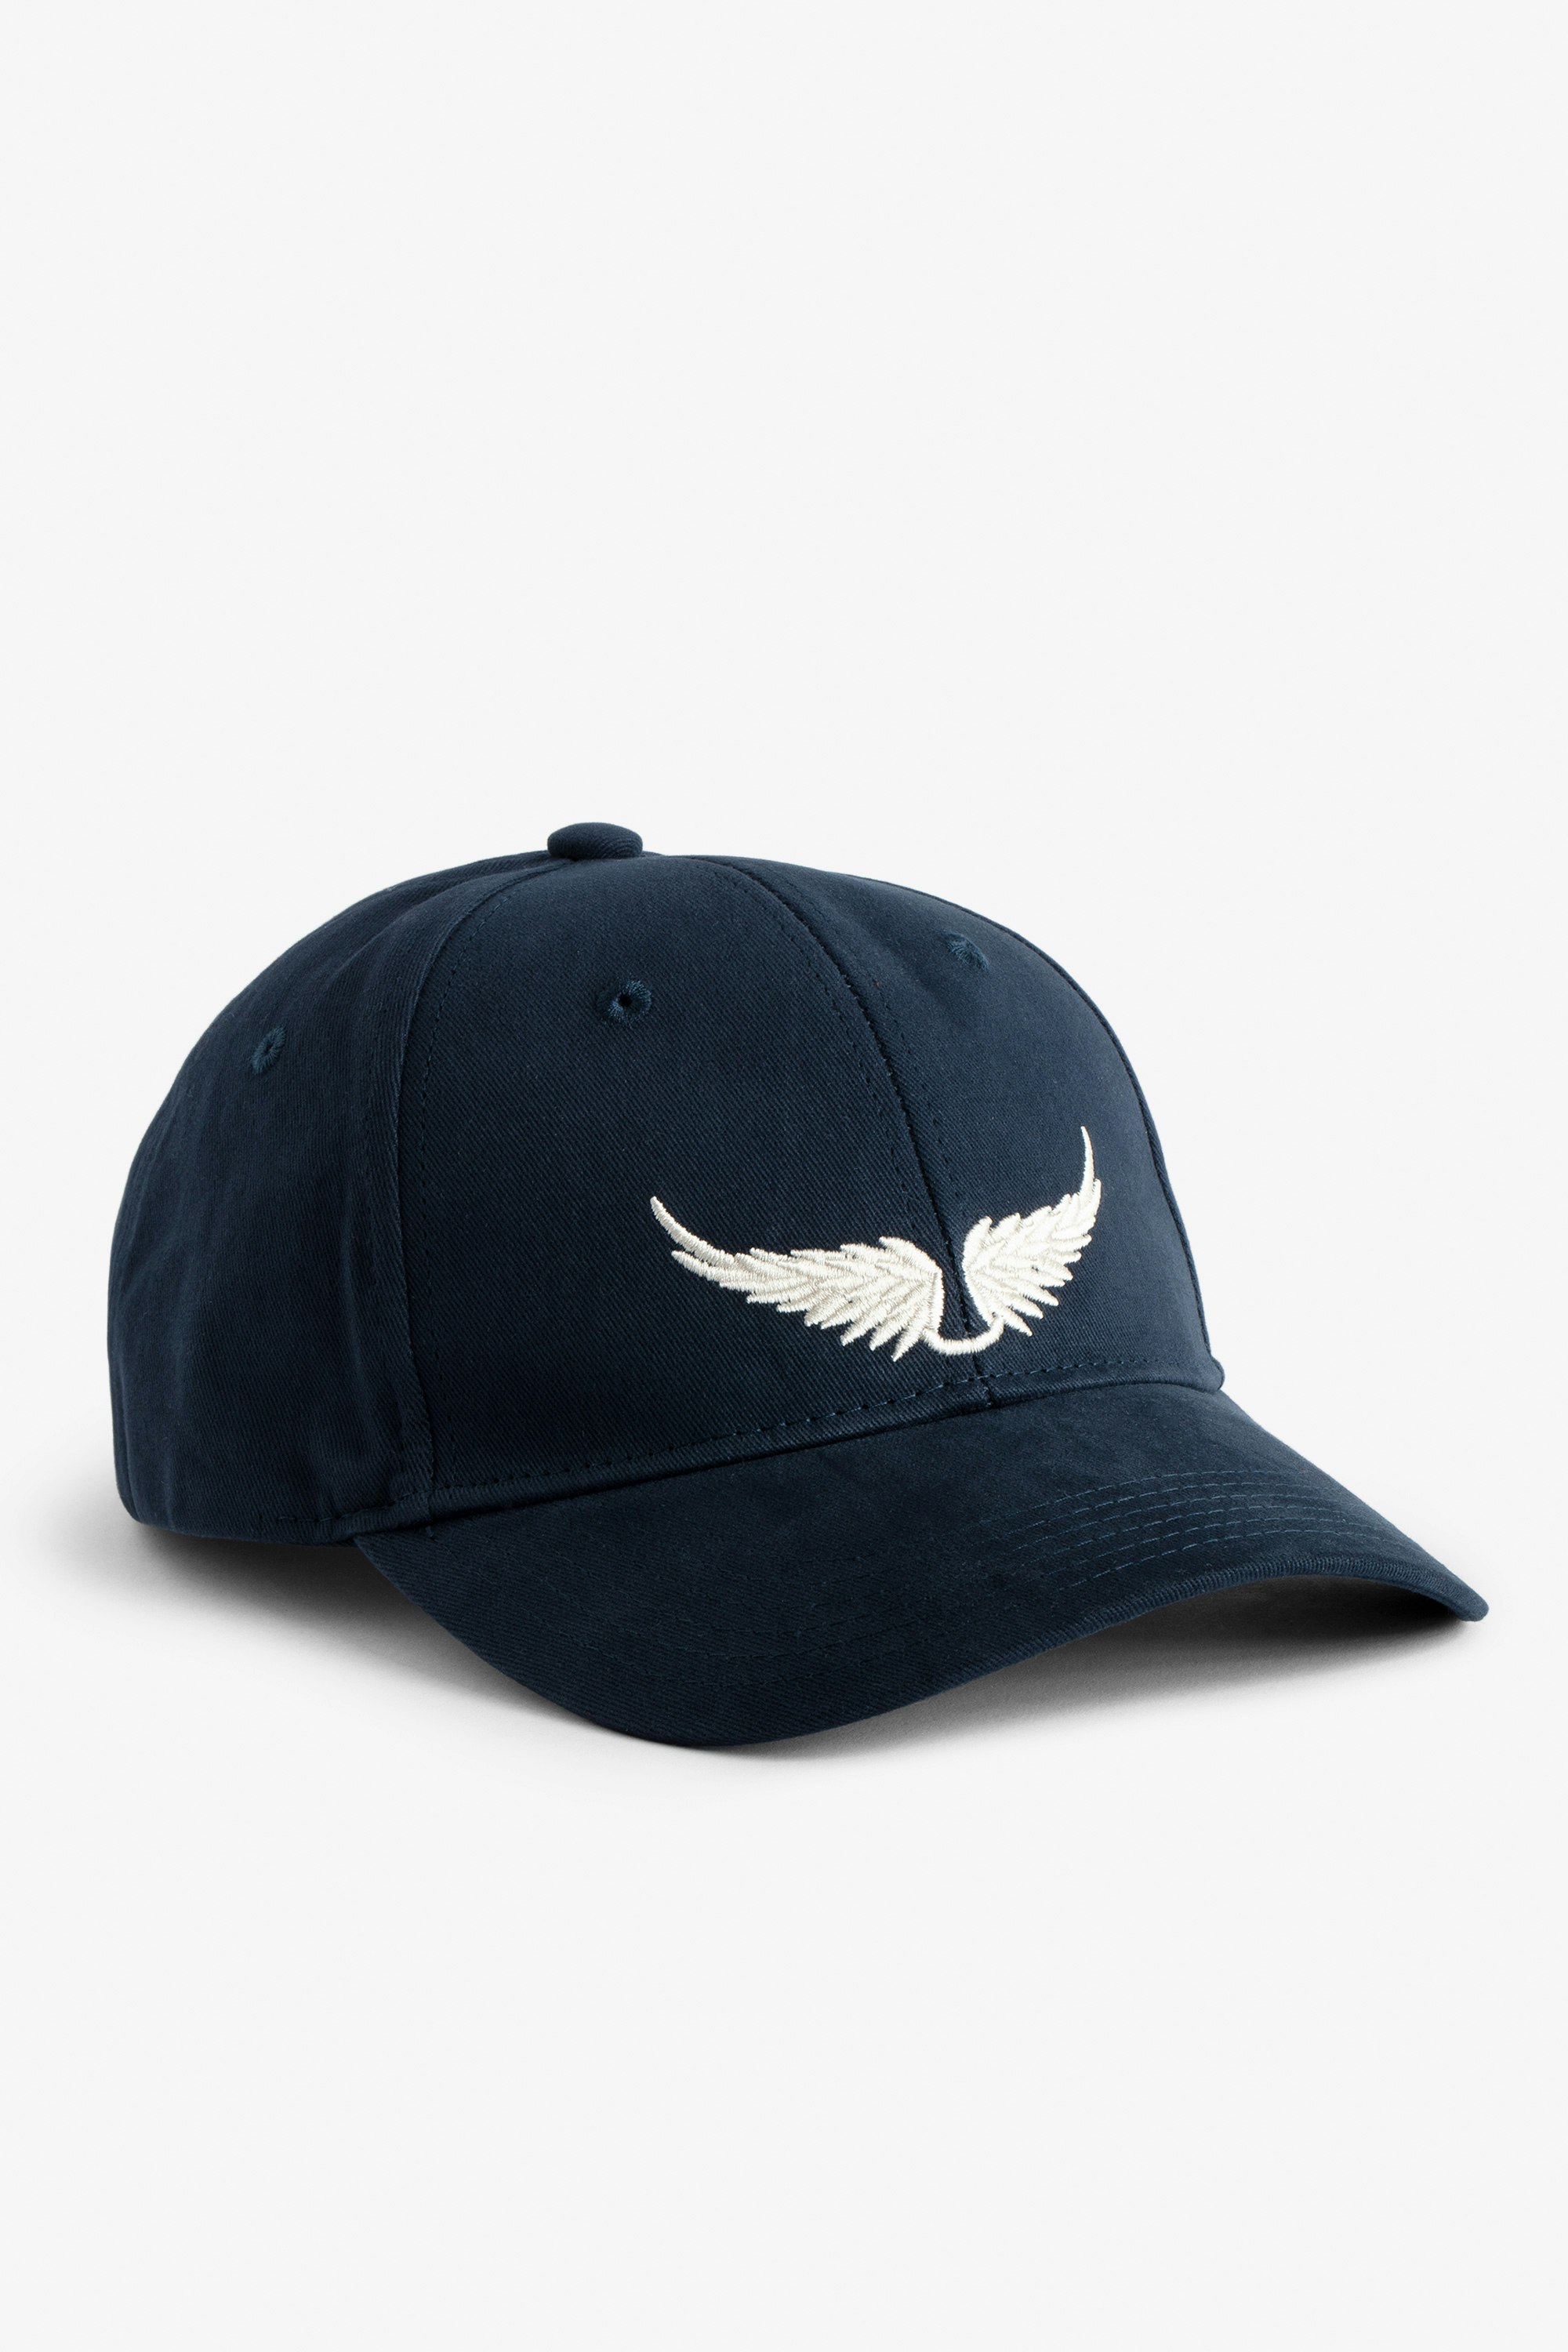 Head Over Heels Baseball Cap - Women’s navy blue cotton baseball cap with embroidered wings.